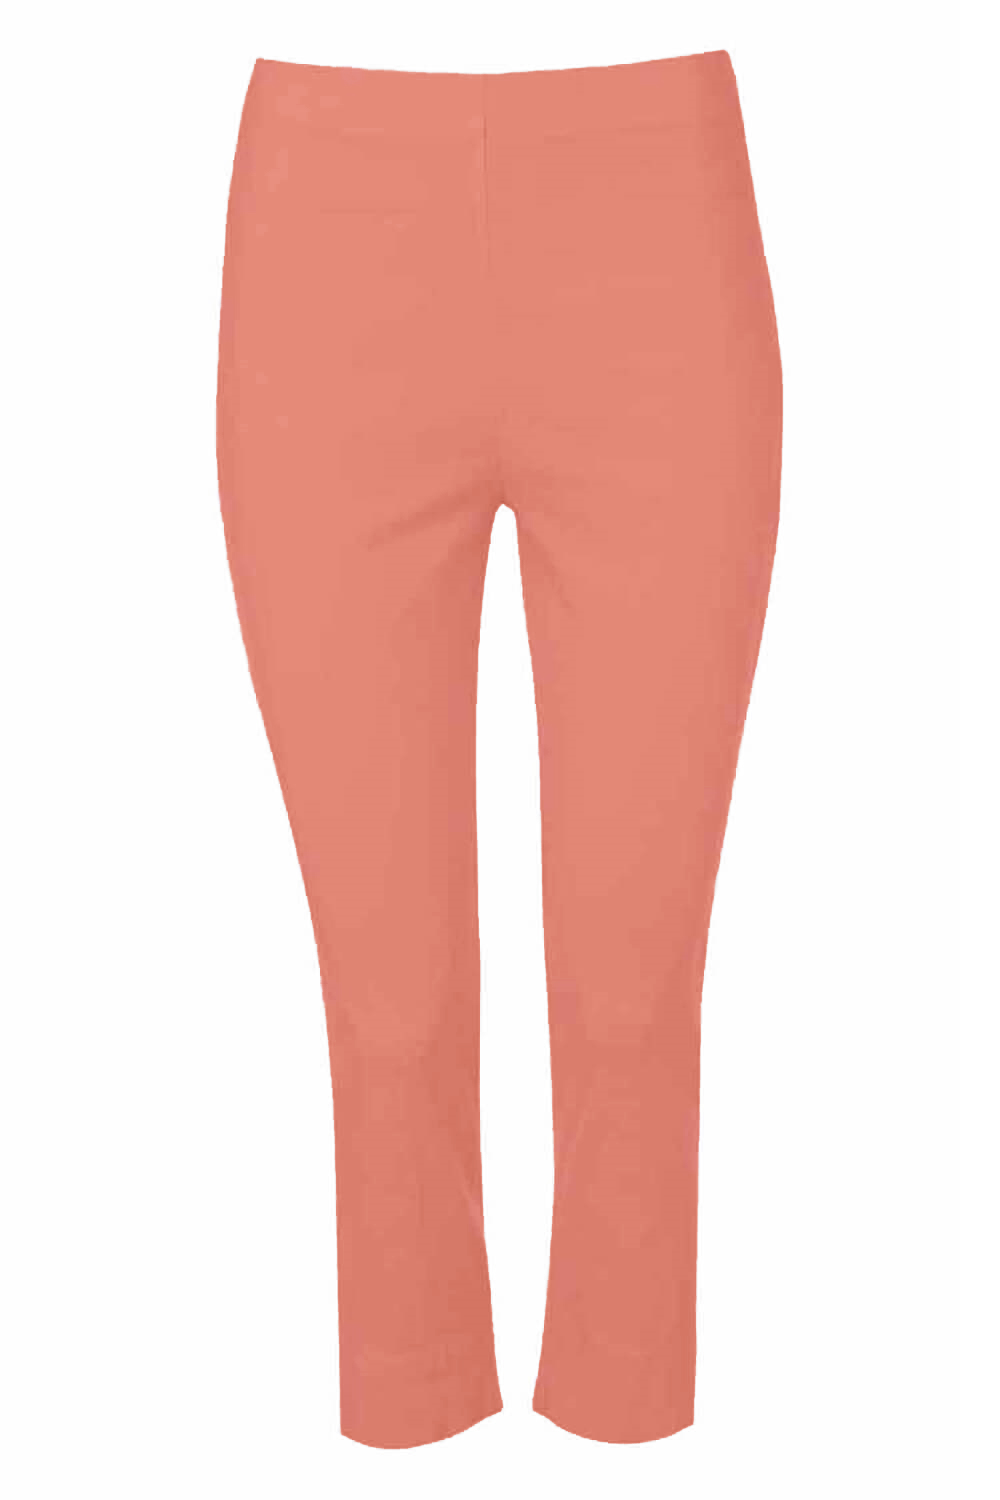 Salmon Pink Cropped Stretch Trouser, Image 4 of 6